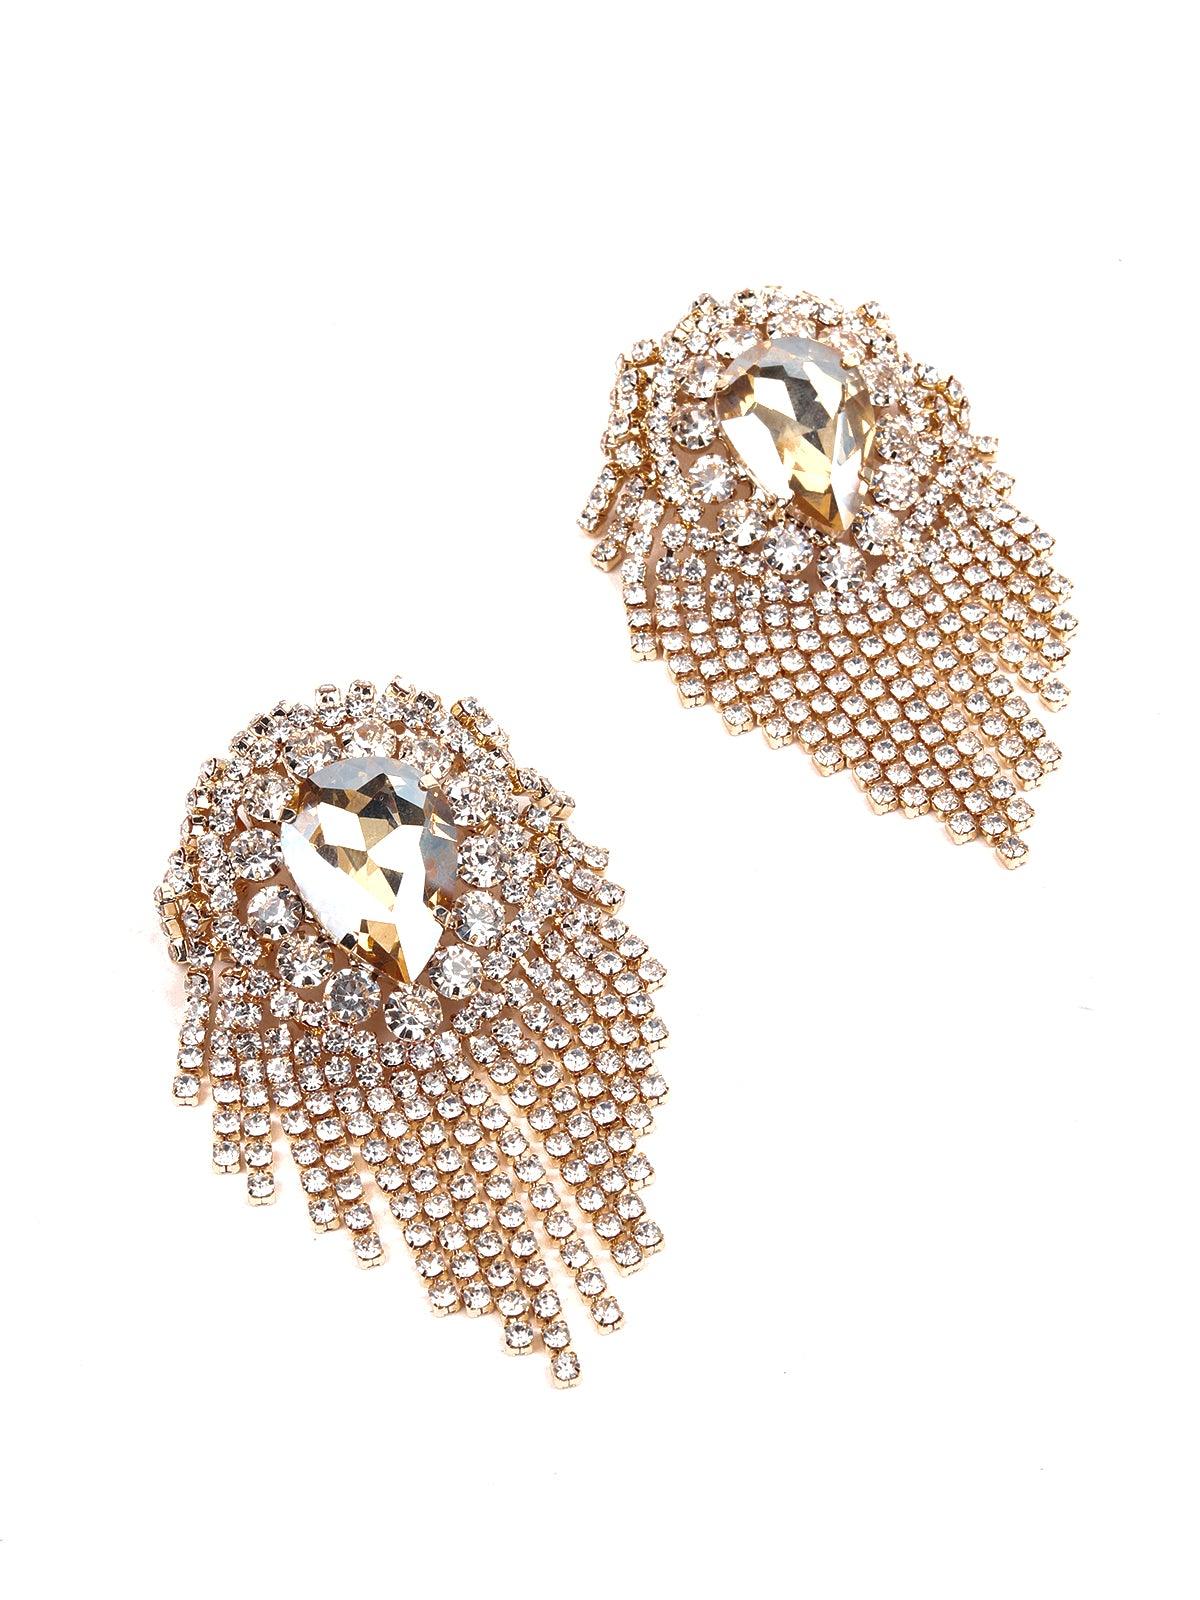 Women's Overload With Crystals Gold-Tone Statement Earrings - Odette